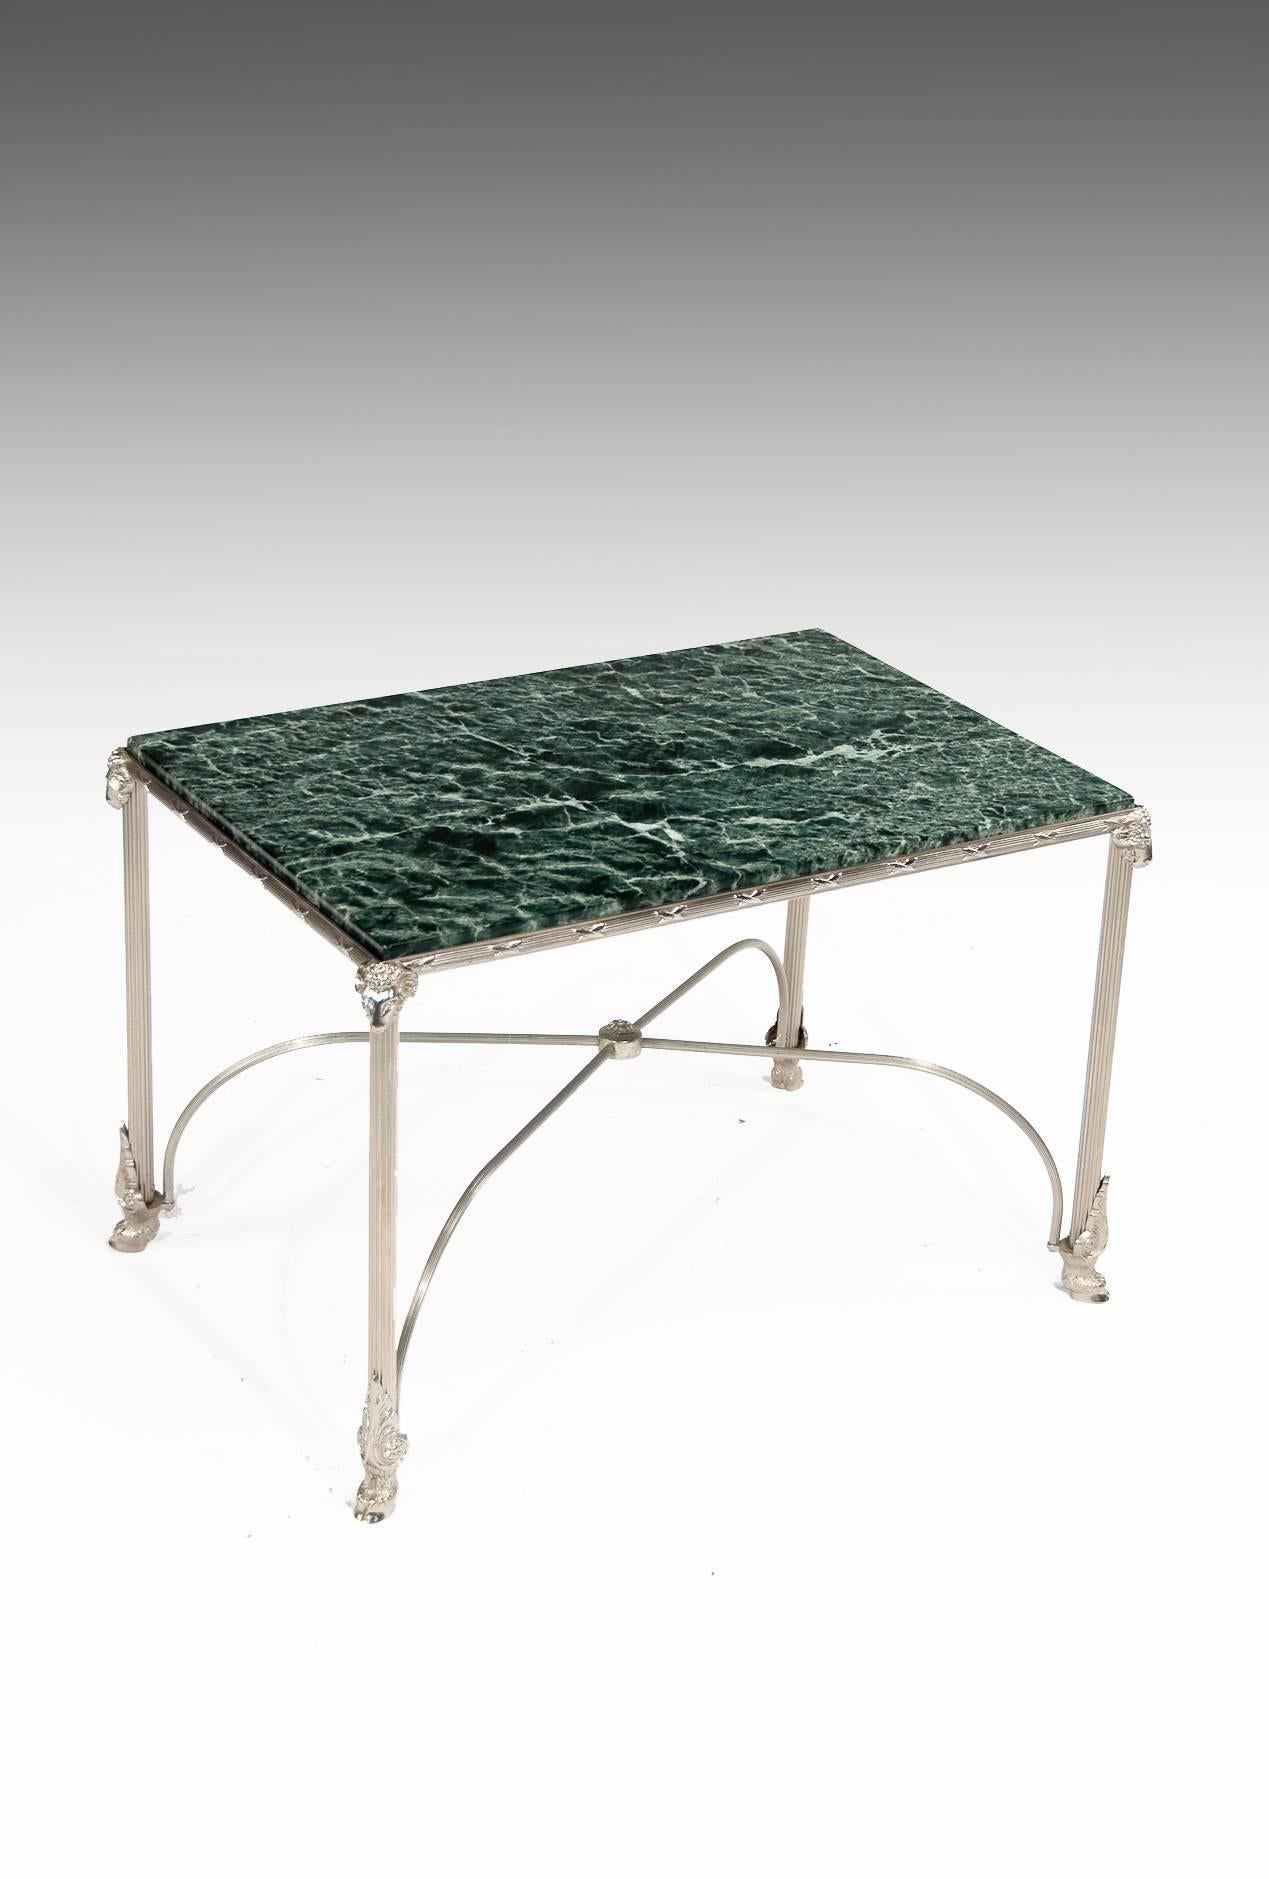 A very fine quality 1920-1950 Nickel plated marble topped occasional table. Having a very good quality veined marble top supported by four reeded legs with ram's head capitals united by a shaped X frame stretcher raised on hoof feet. In superb